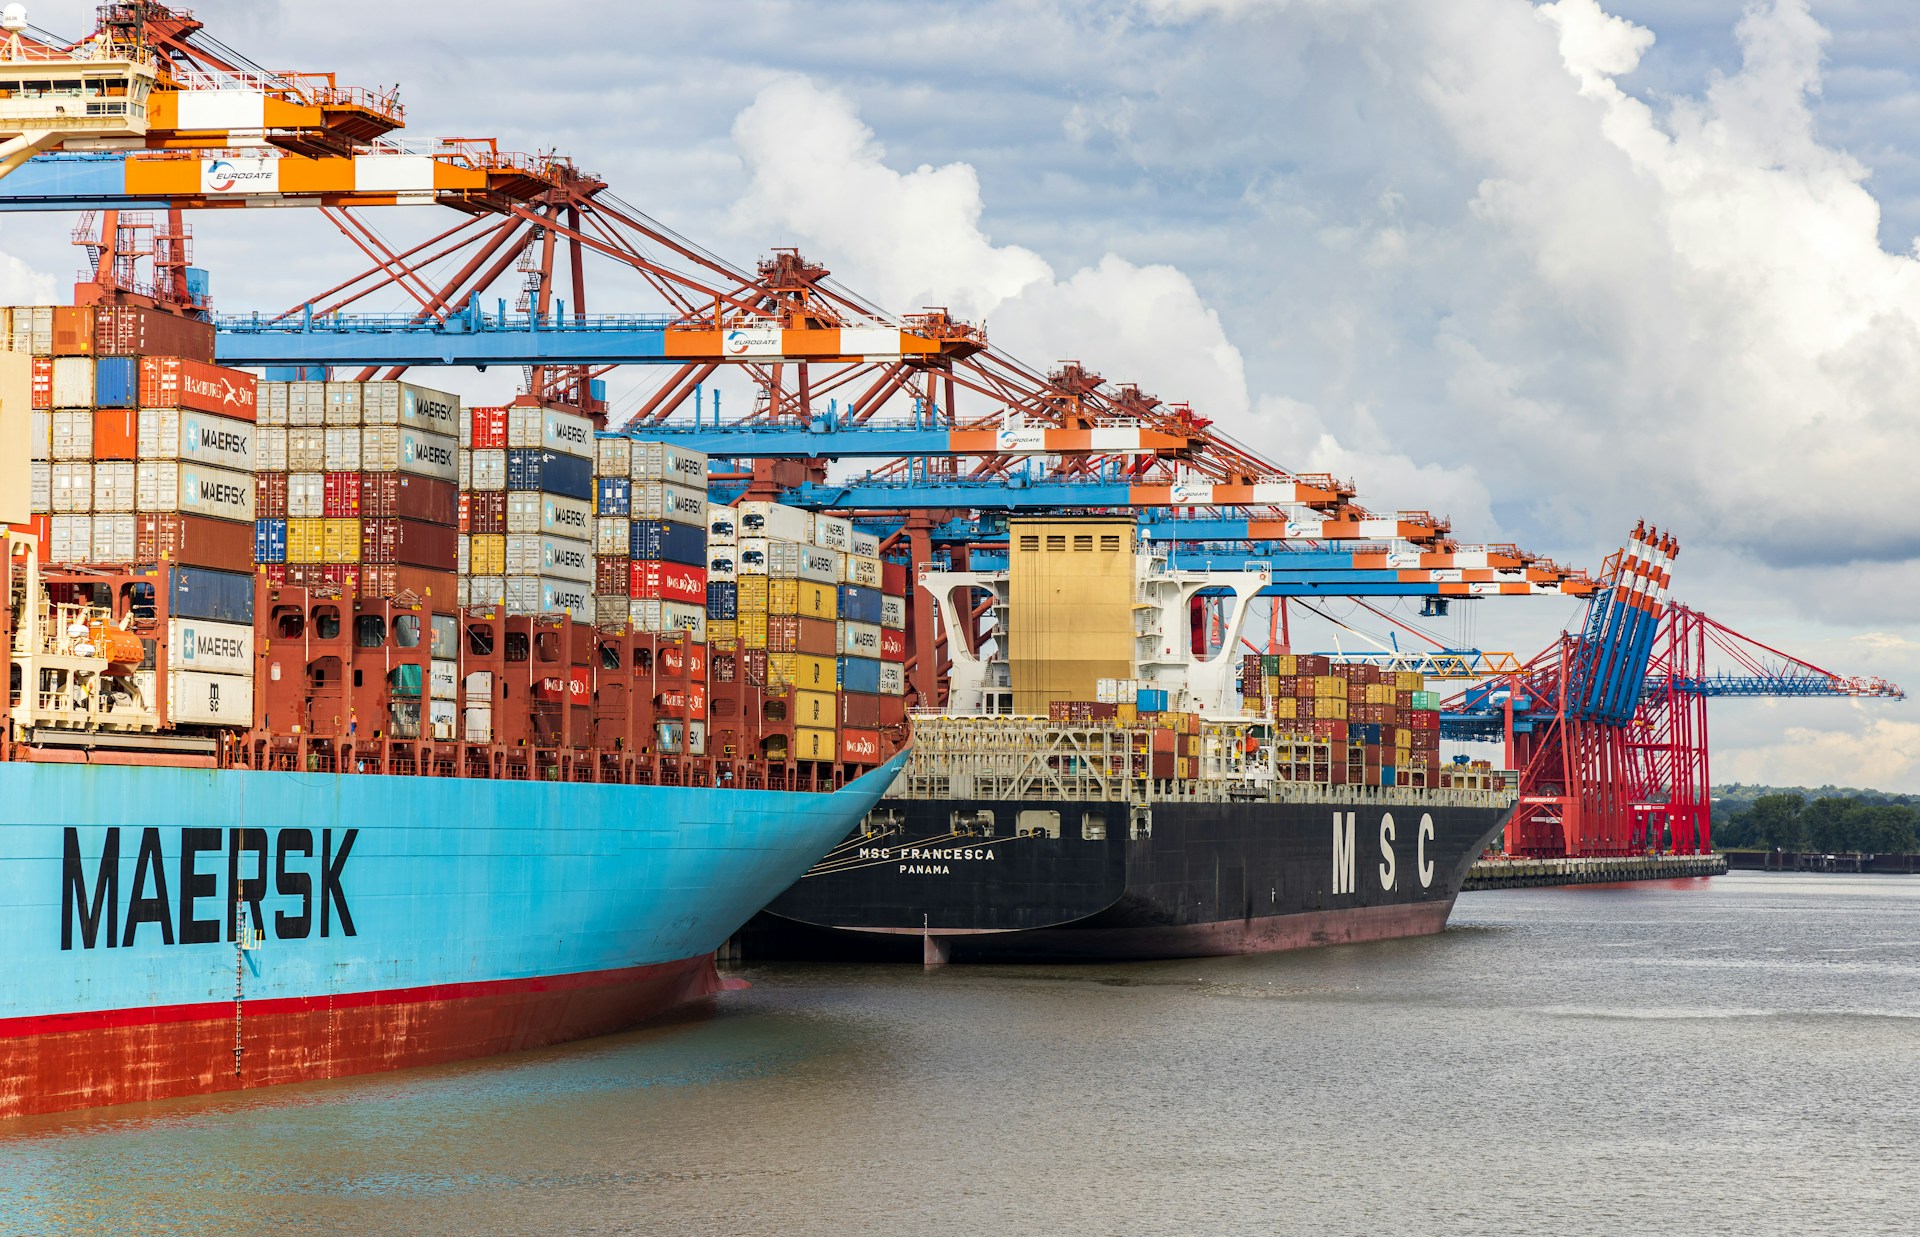 A Maersk containership in port